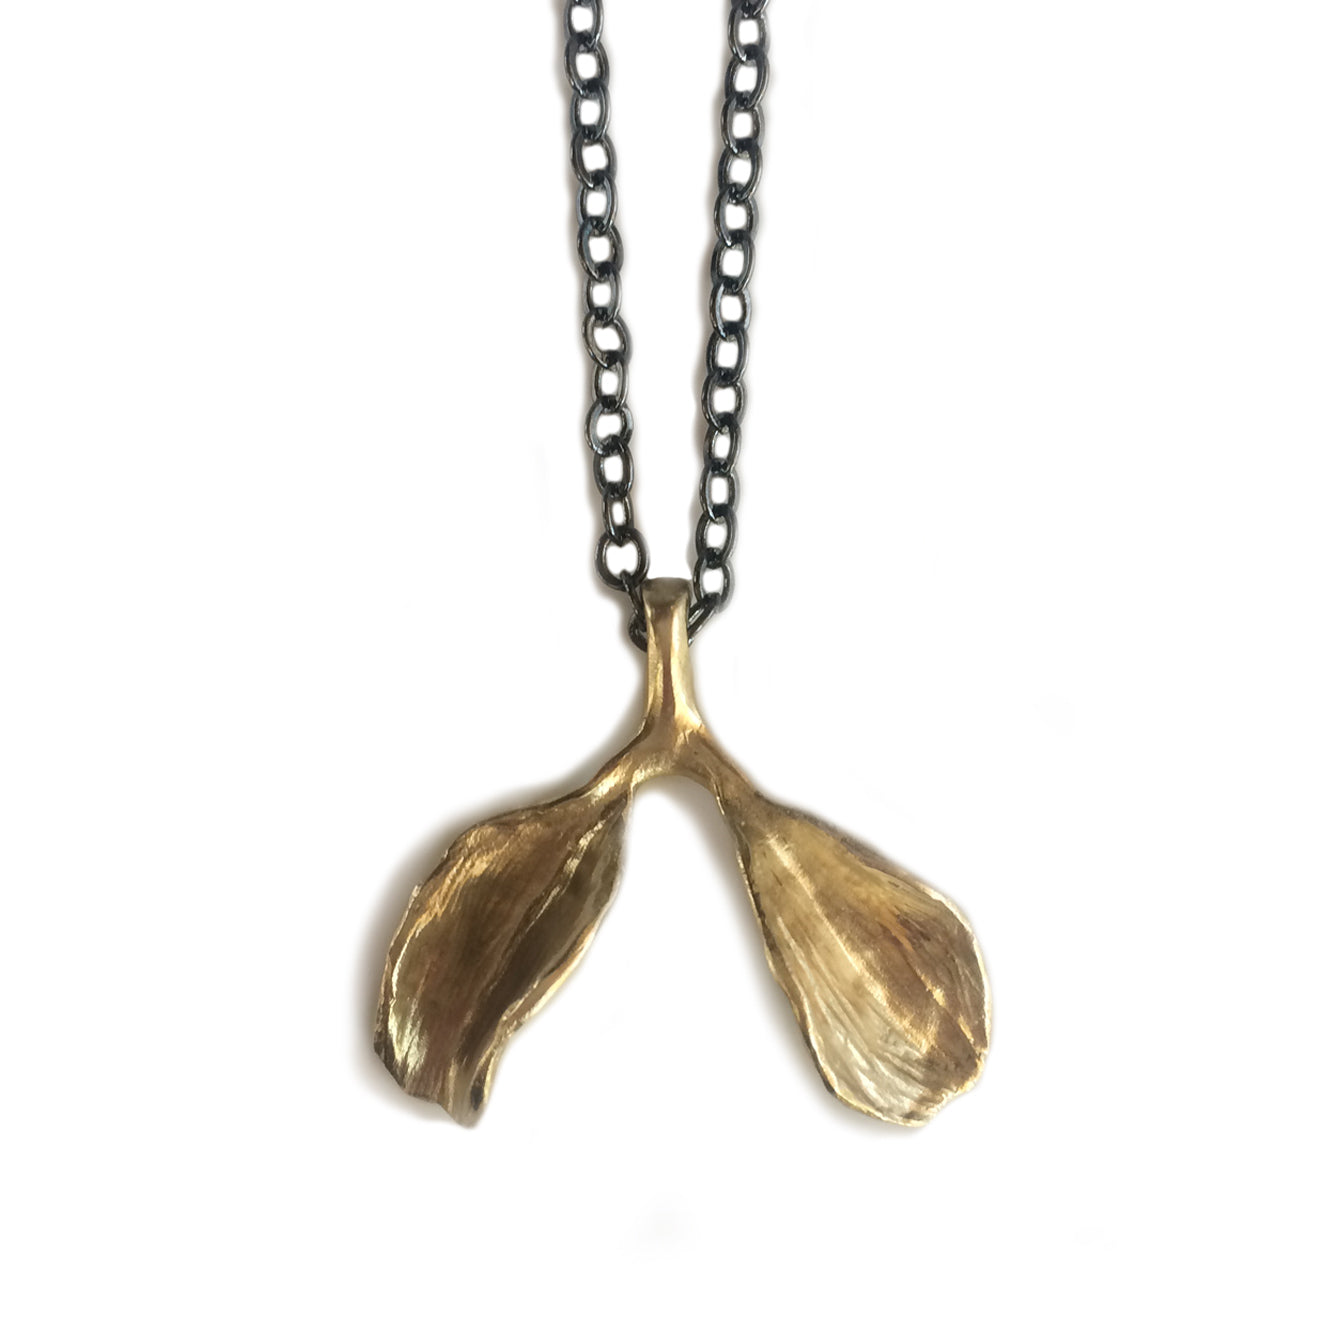 Dyad Necklace - Bronze or Silver